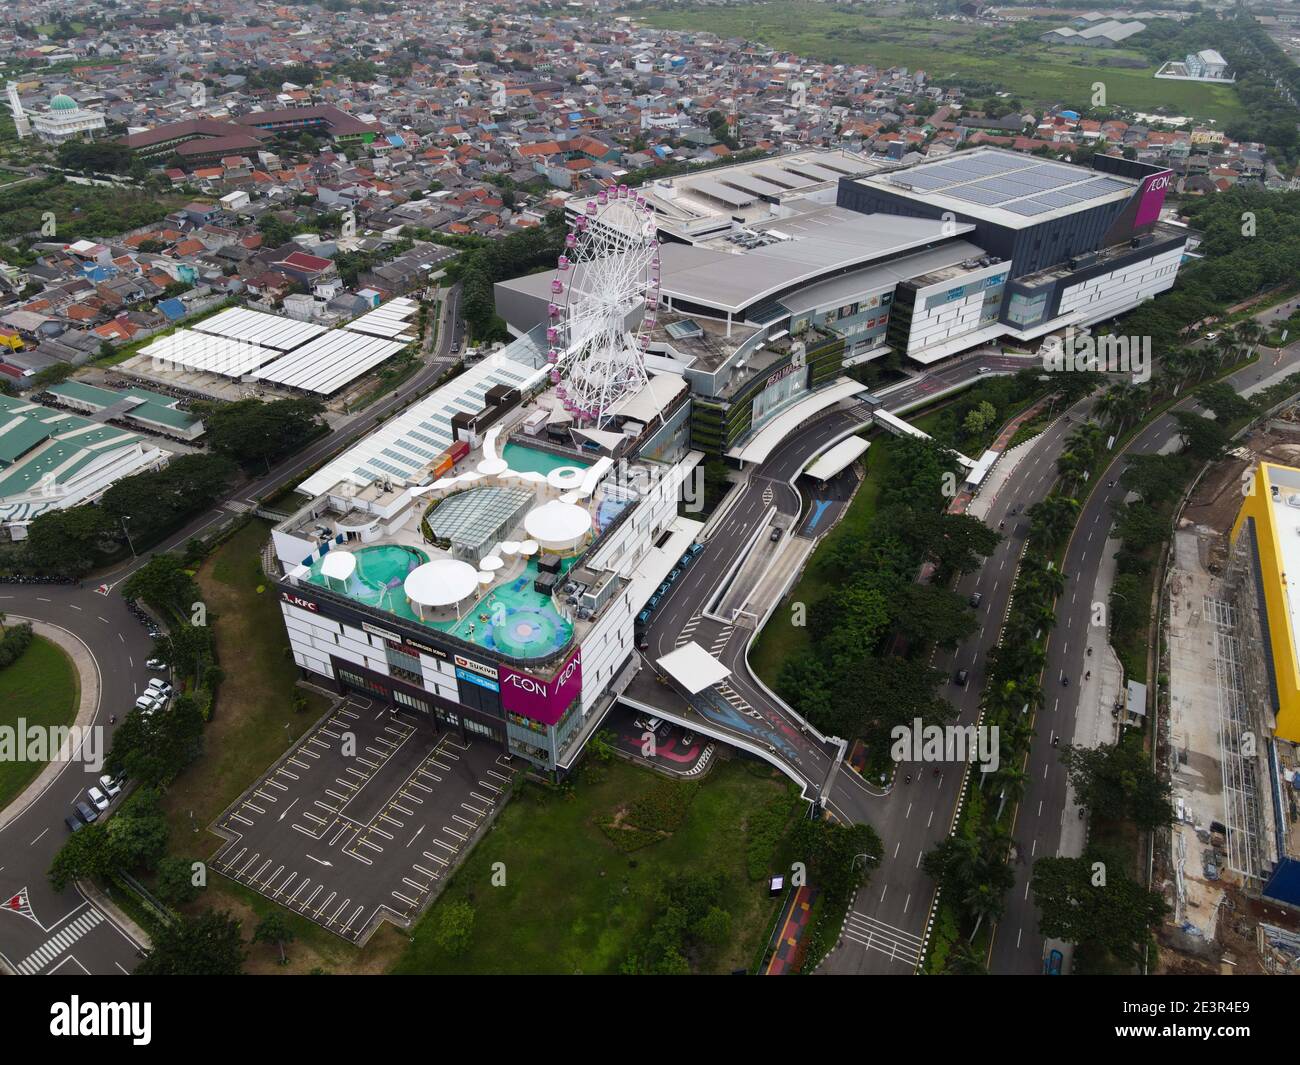 Aerial View Of Aeon Mall Jakarta Garden City Aeon Is A Largest Shopping Mall In East Jakarta Jakarta Indonesia January 20 2021 Stock Photo Alamy